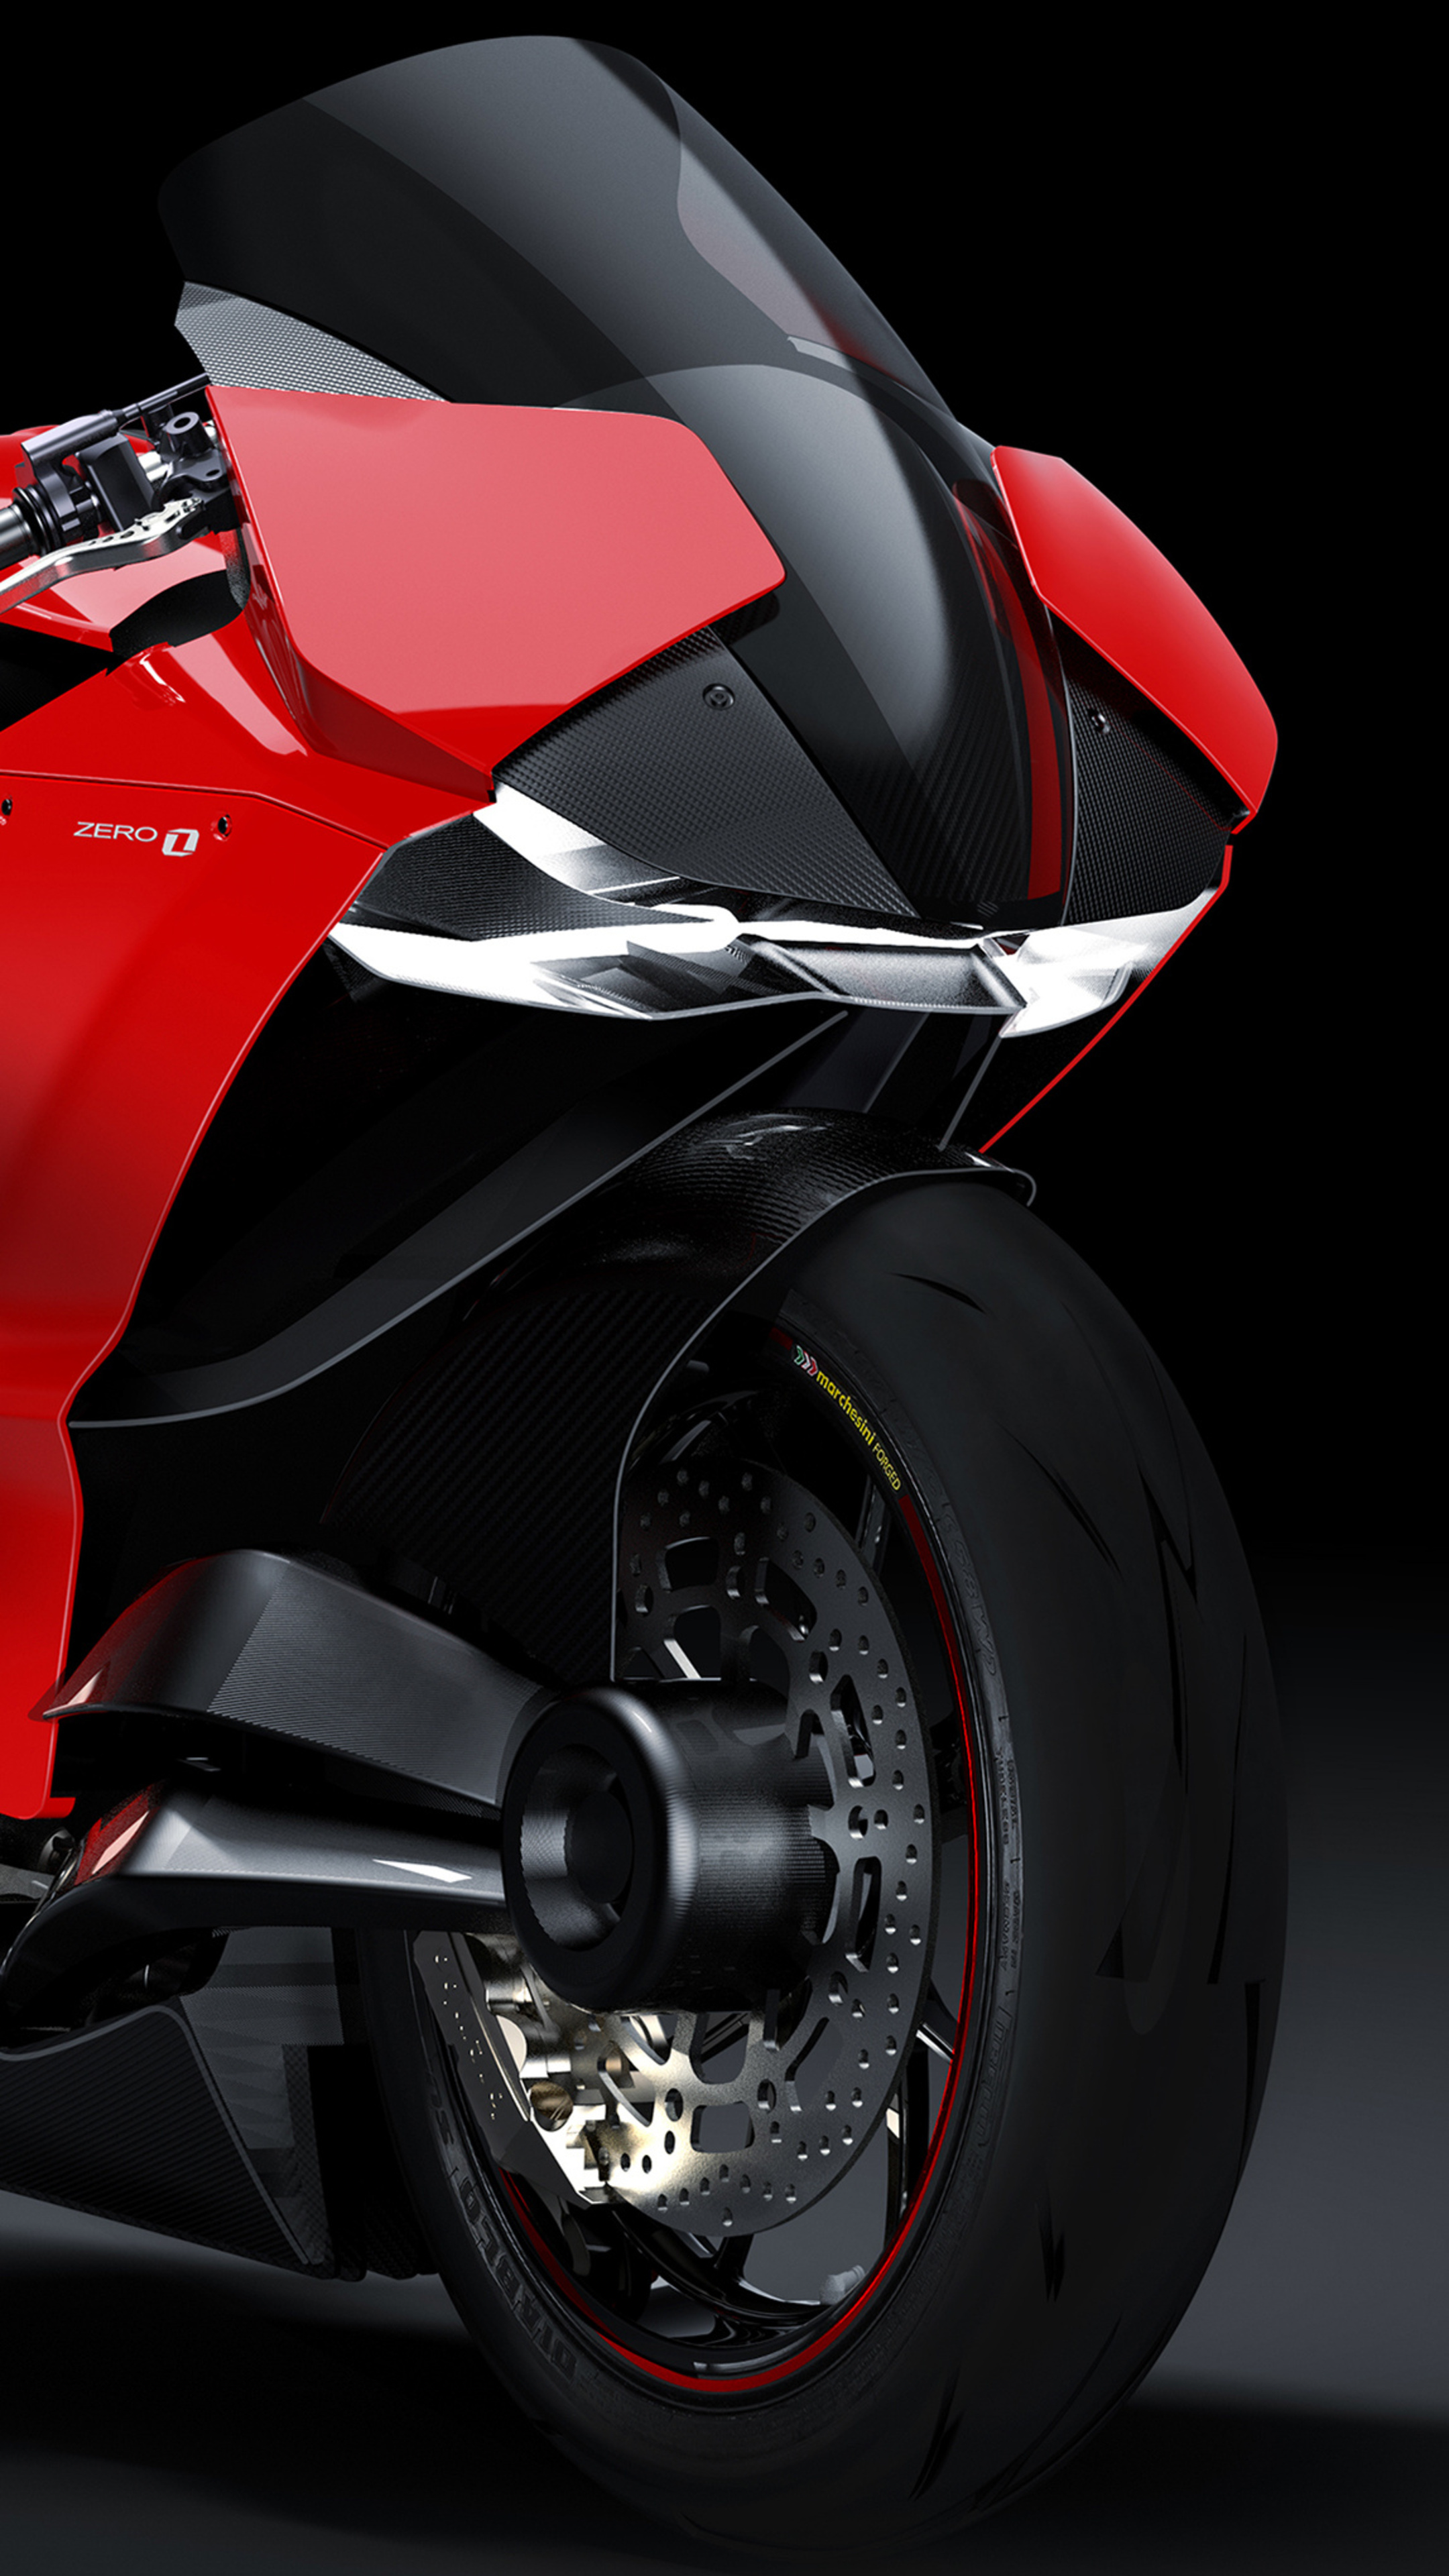 Superbike: Ducati Zero Electric motorcycle concept, A sports bike of Ducati and Zero Inc's joint production. 2160x3840 4K Background.